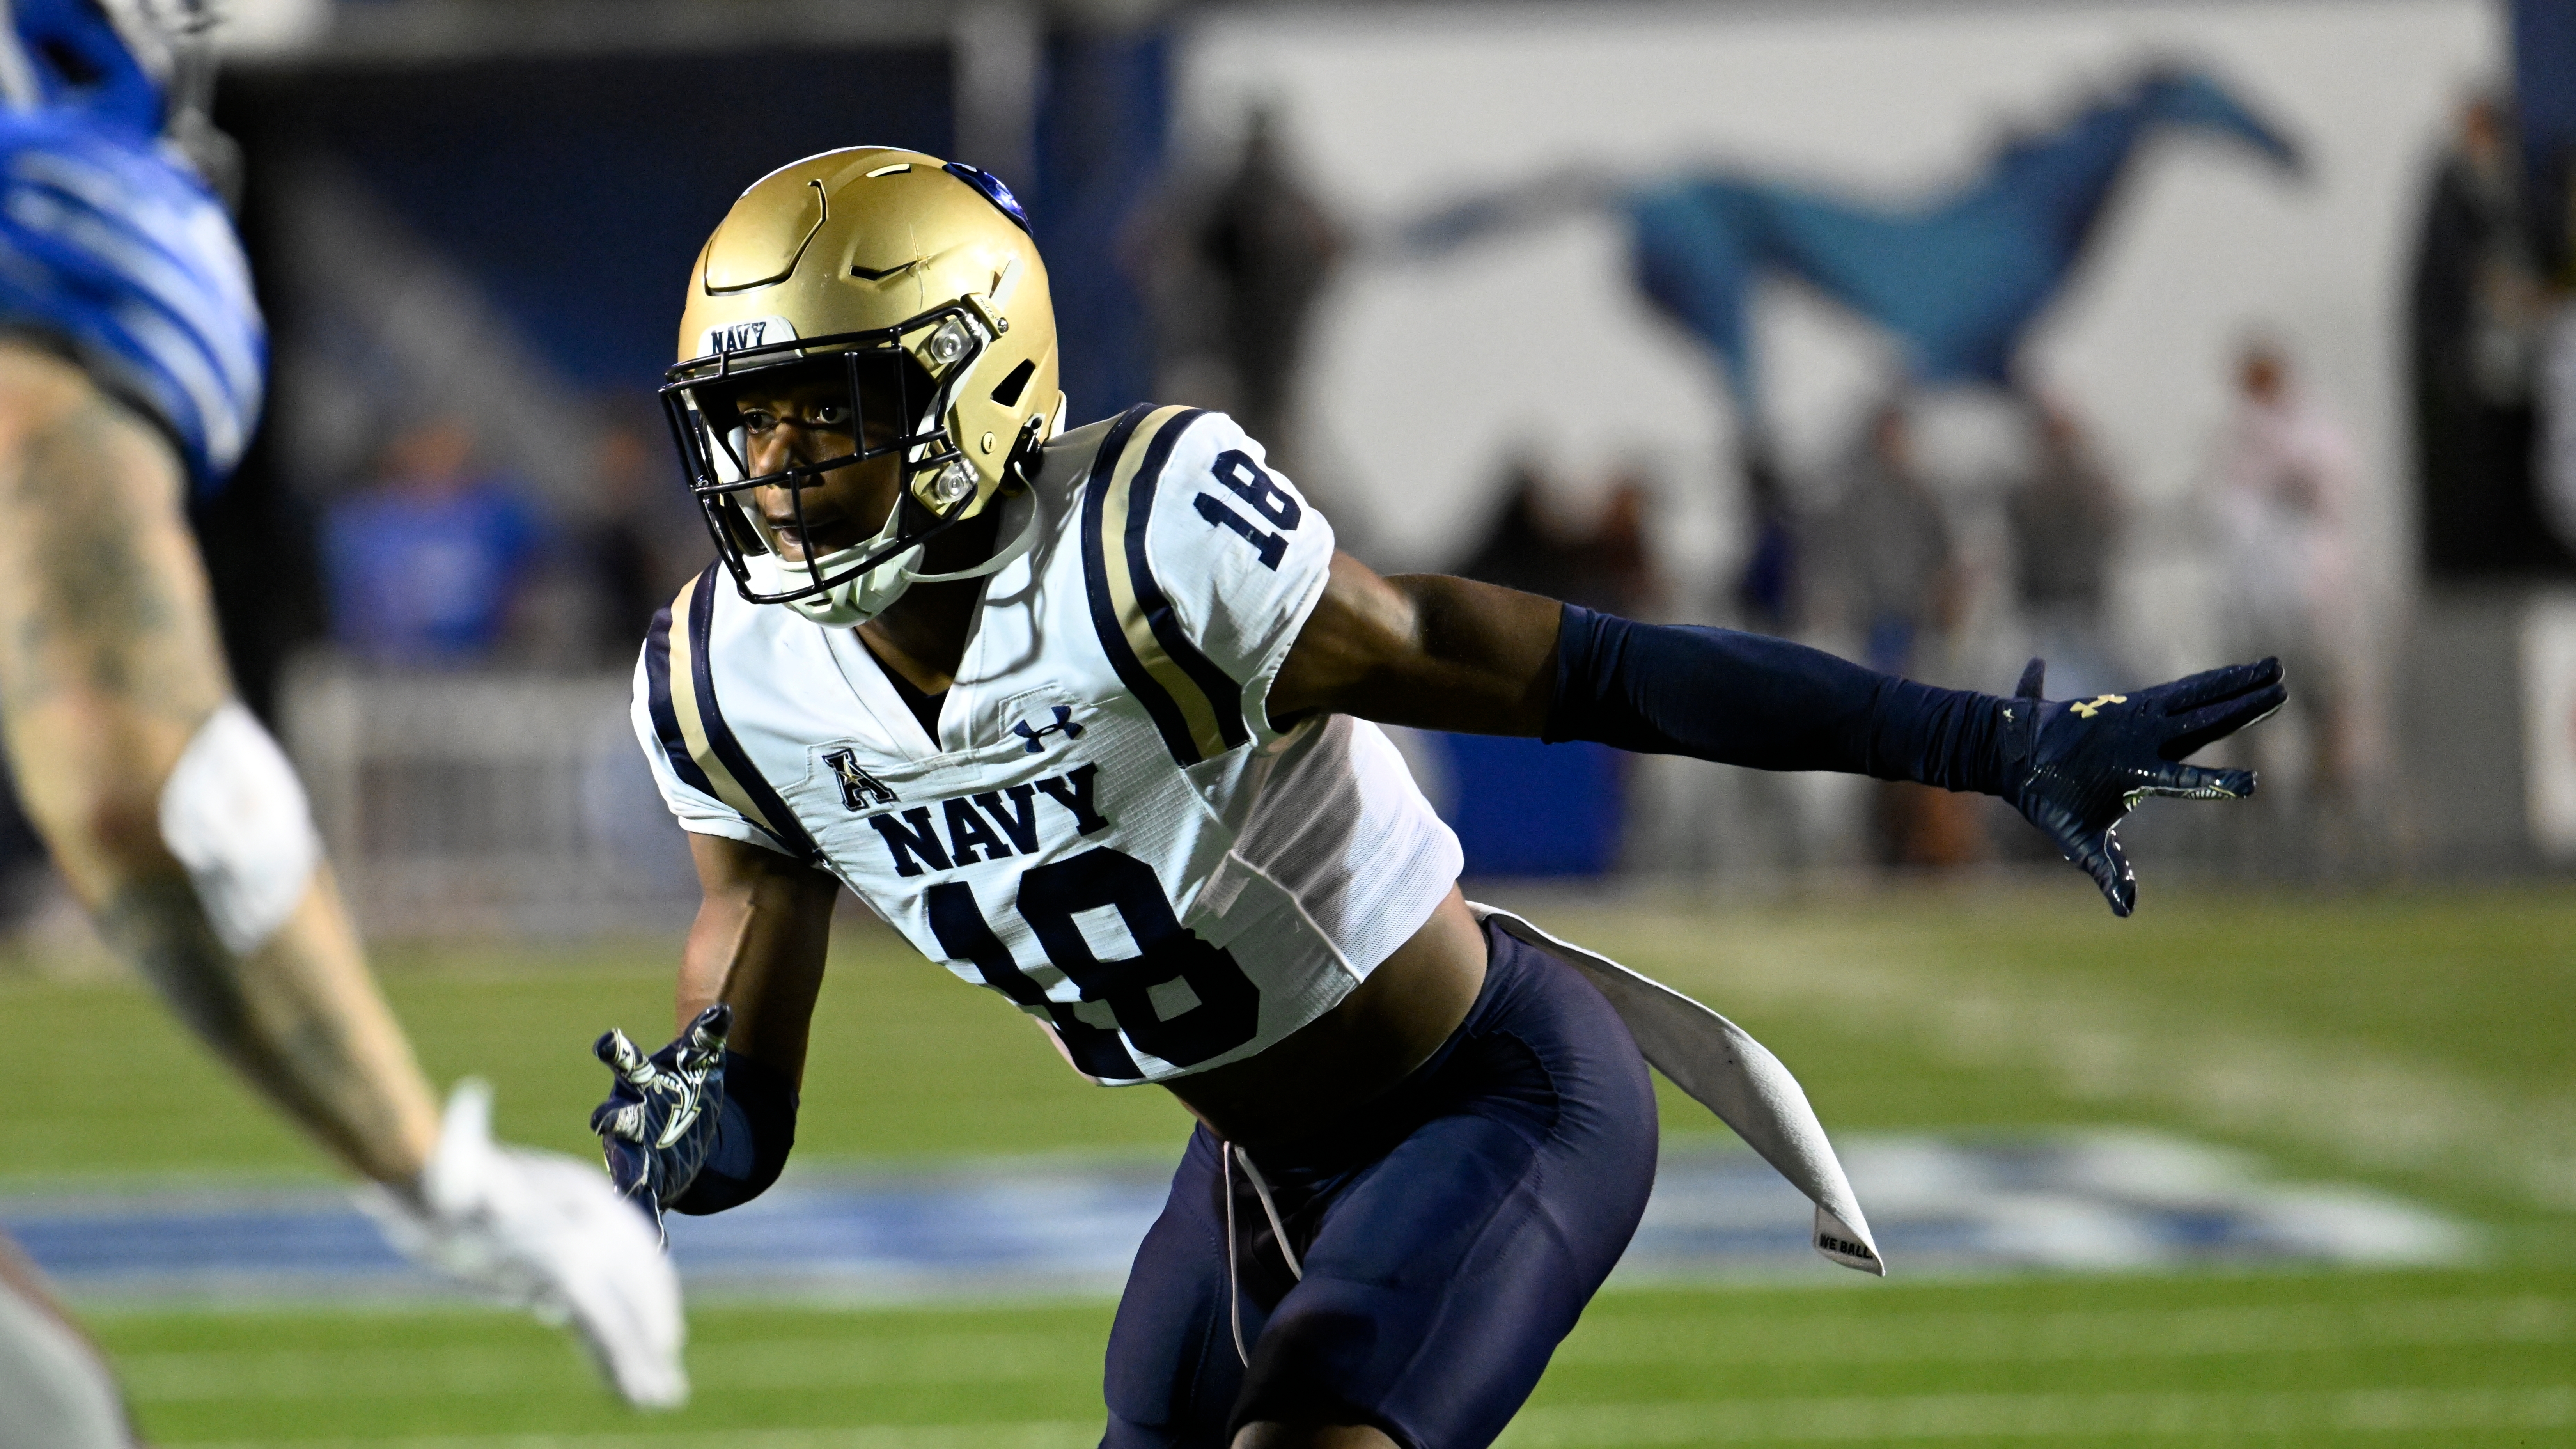 Navy safety Rayuan Lane taking his game to 'another level' after